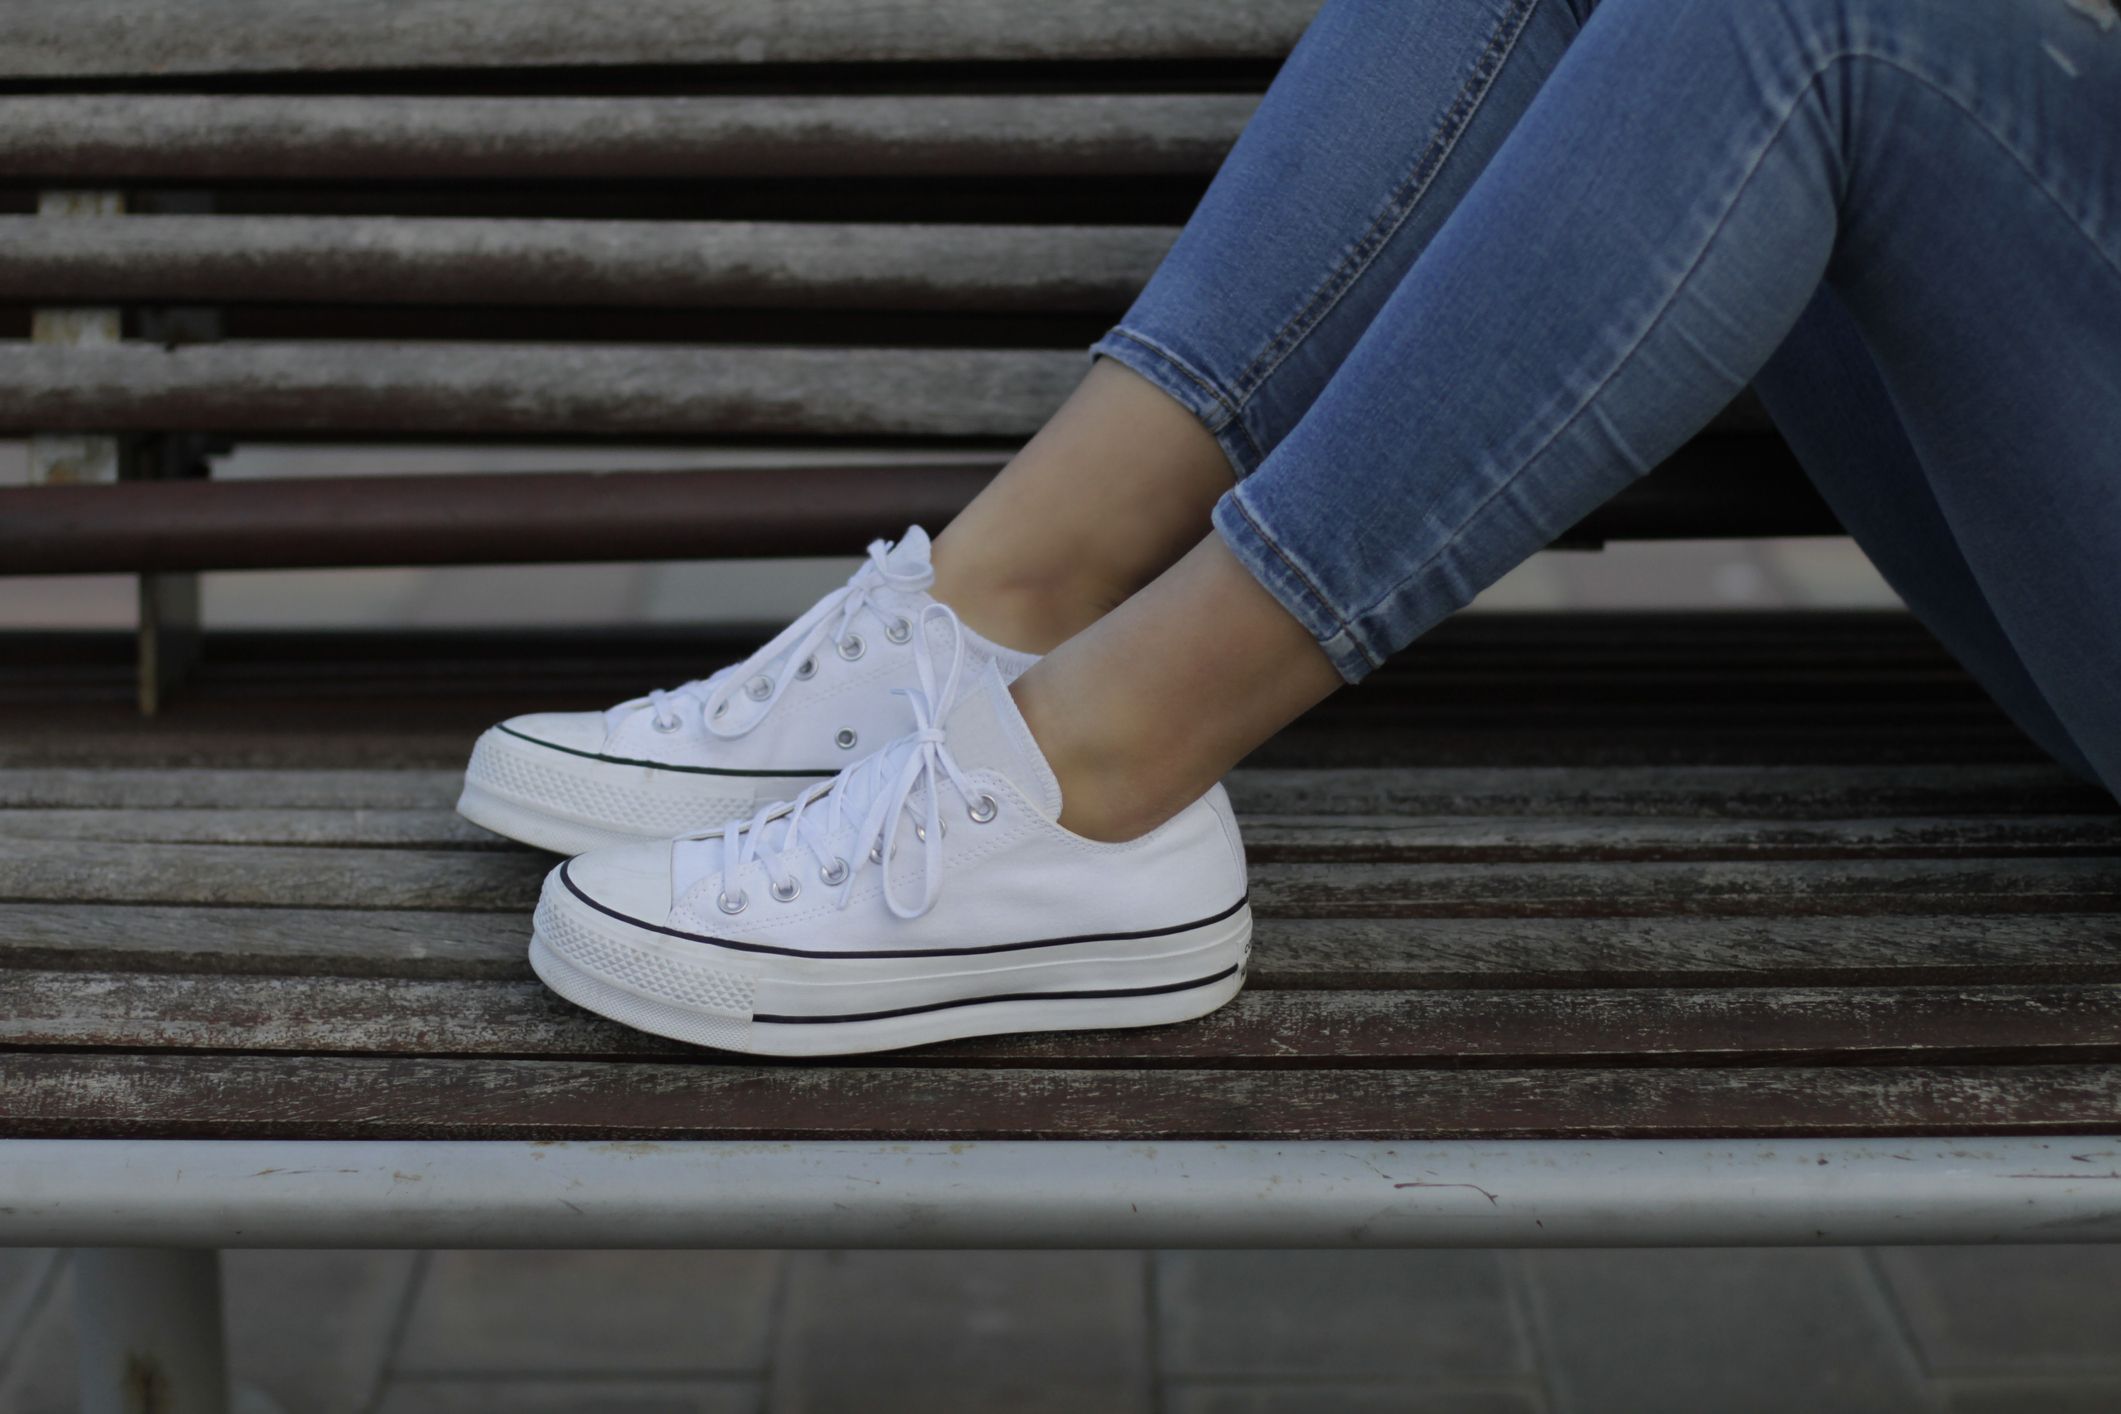 How to get white trainers clean and fresh